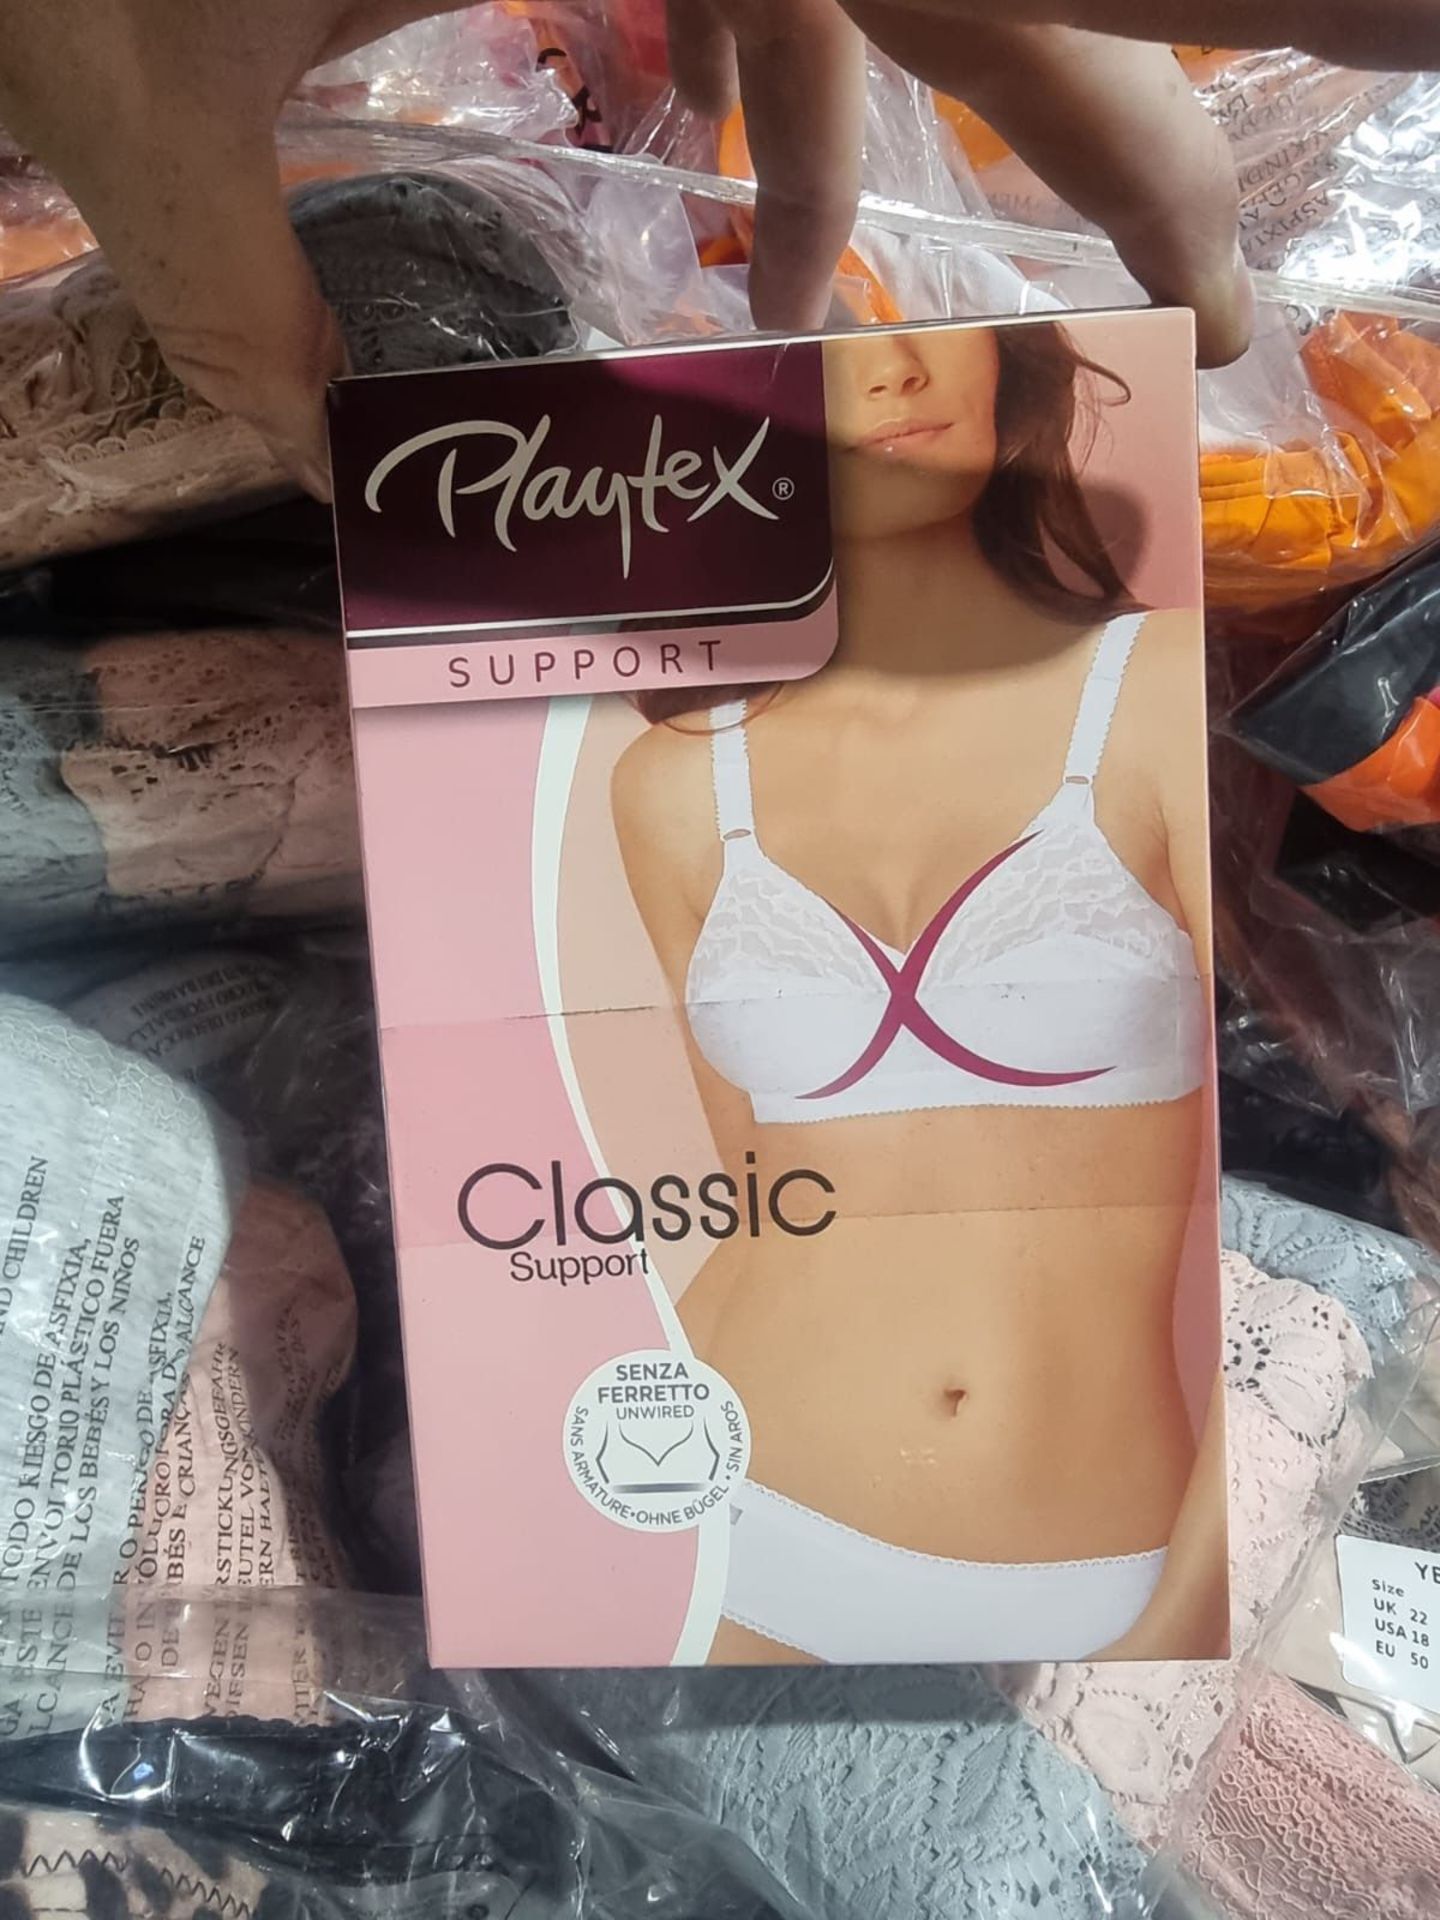 100 x NEW PACKAGED ASSORTED SWIM & UNDERWEAR FROM BRAND SUCH AS WONDERBRA, BOUX AVENUE, ANN SUMMERS, - Image 36 of 53